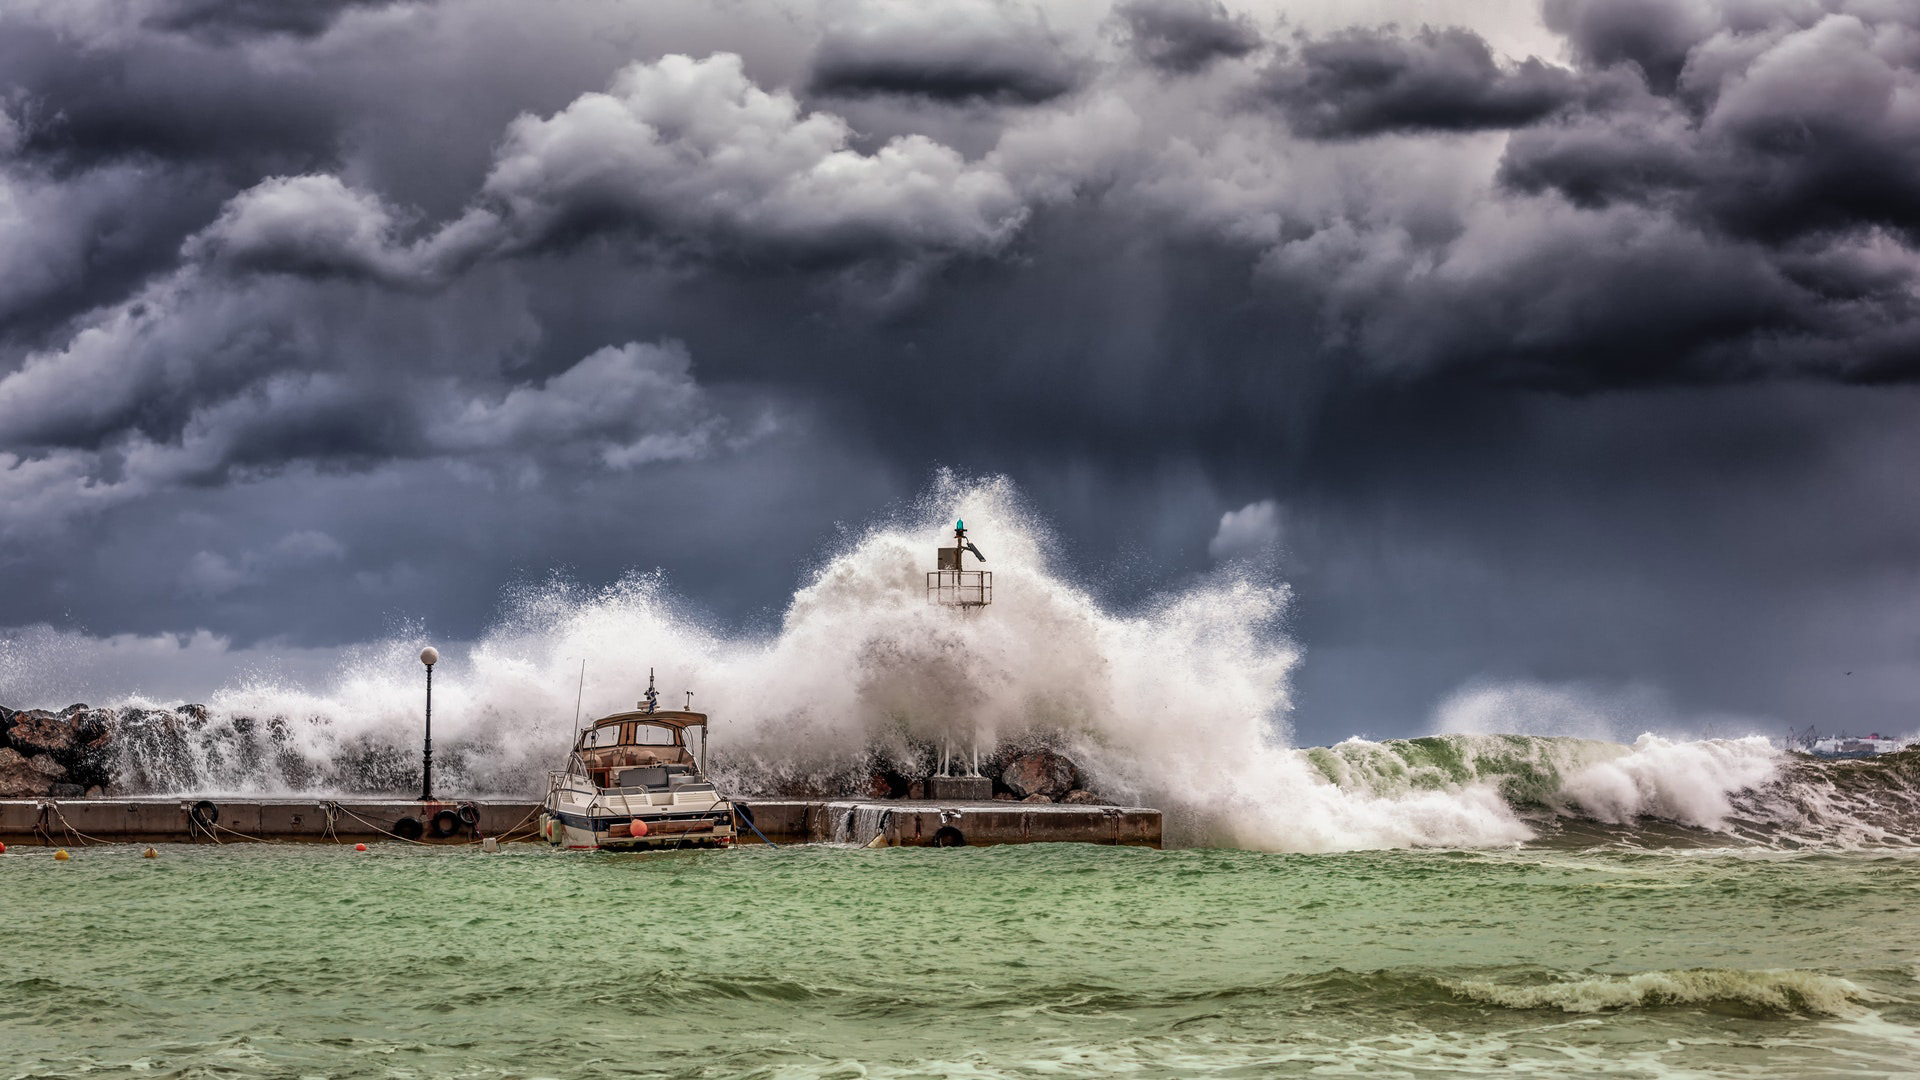 A large wave crashing over a dock with dark clouds in the background